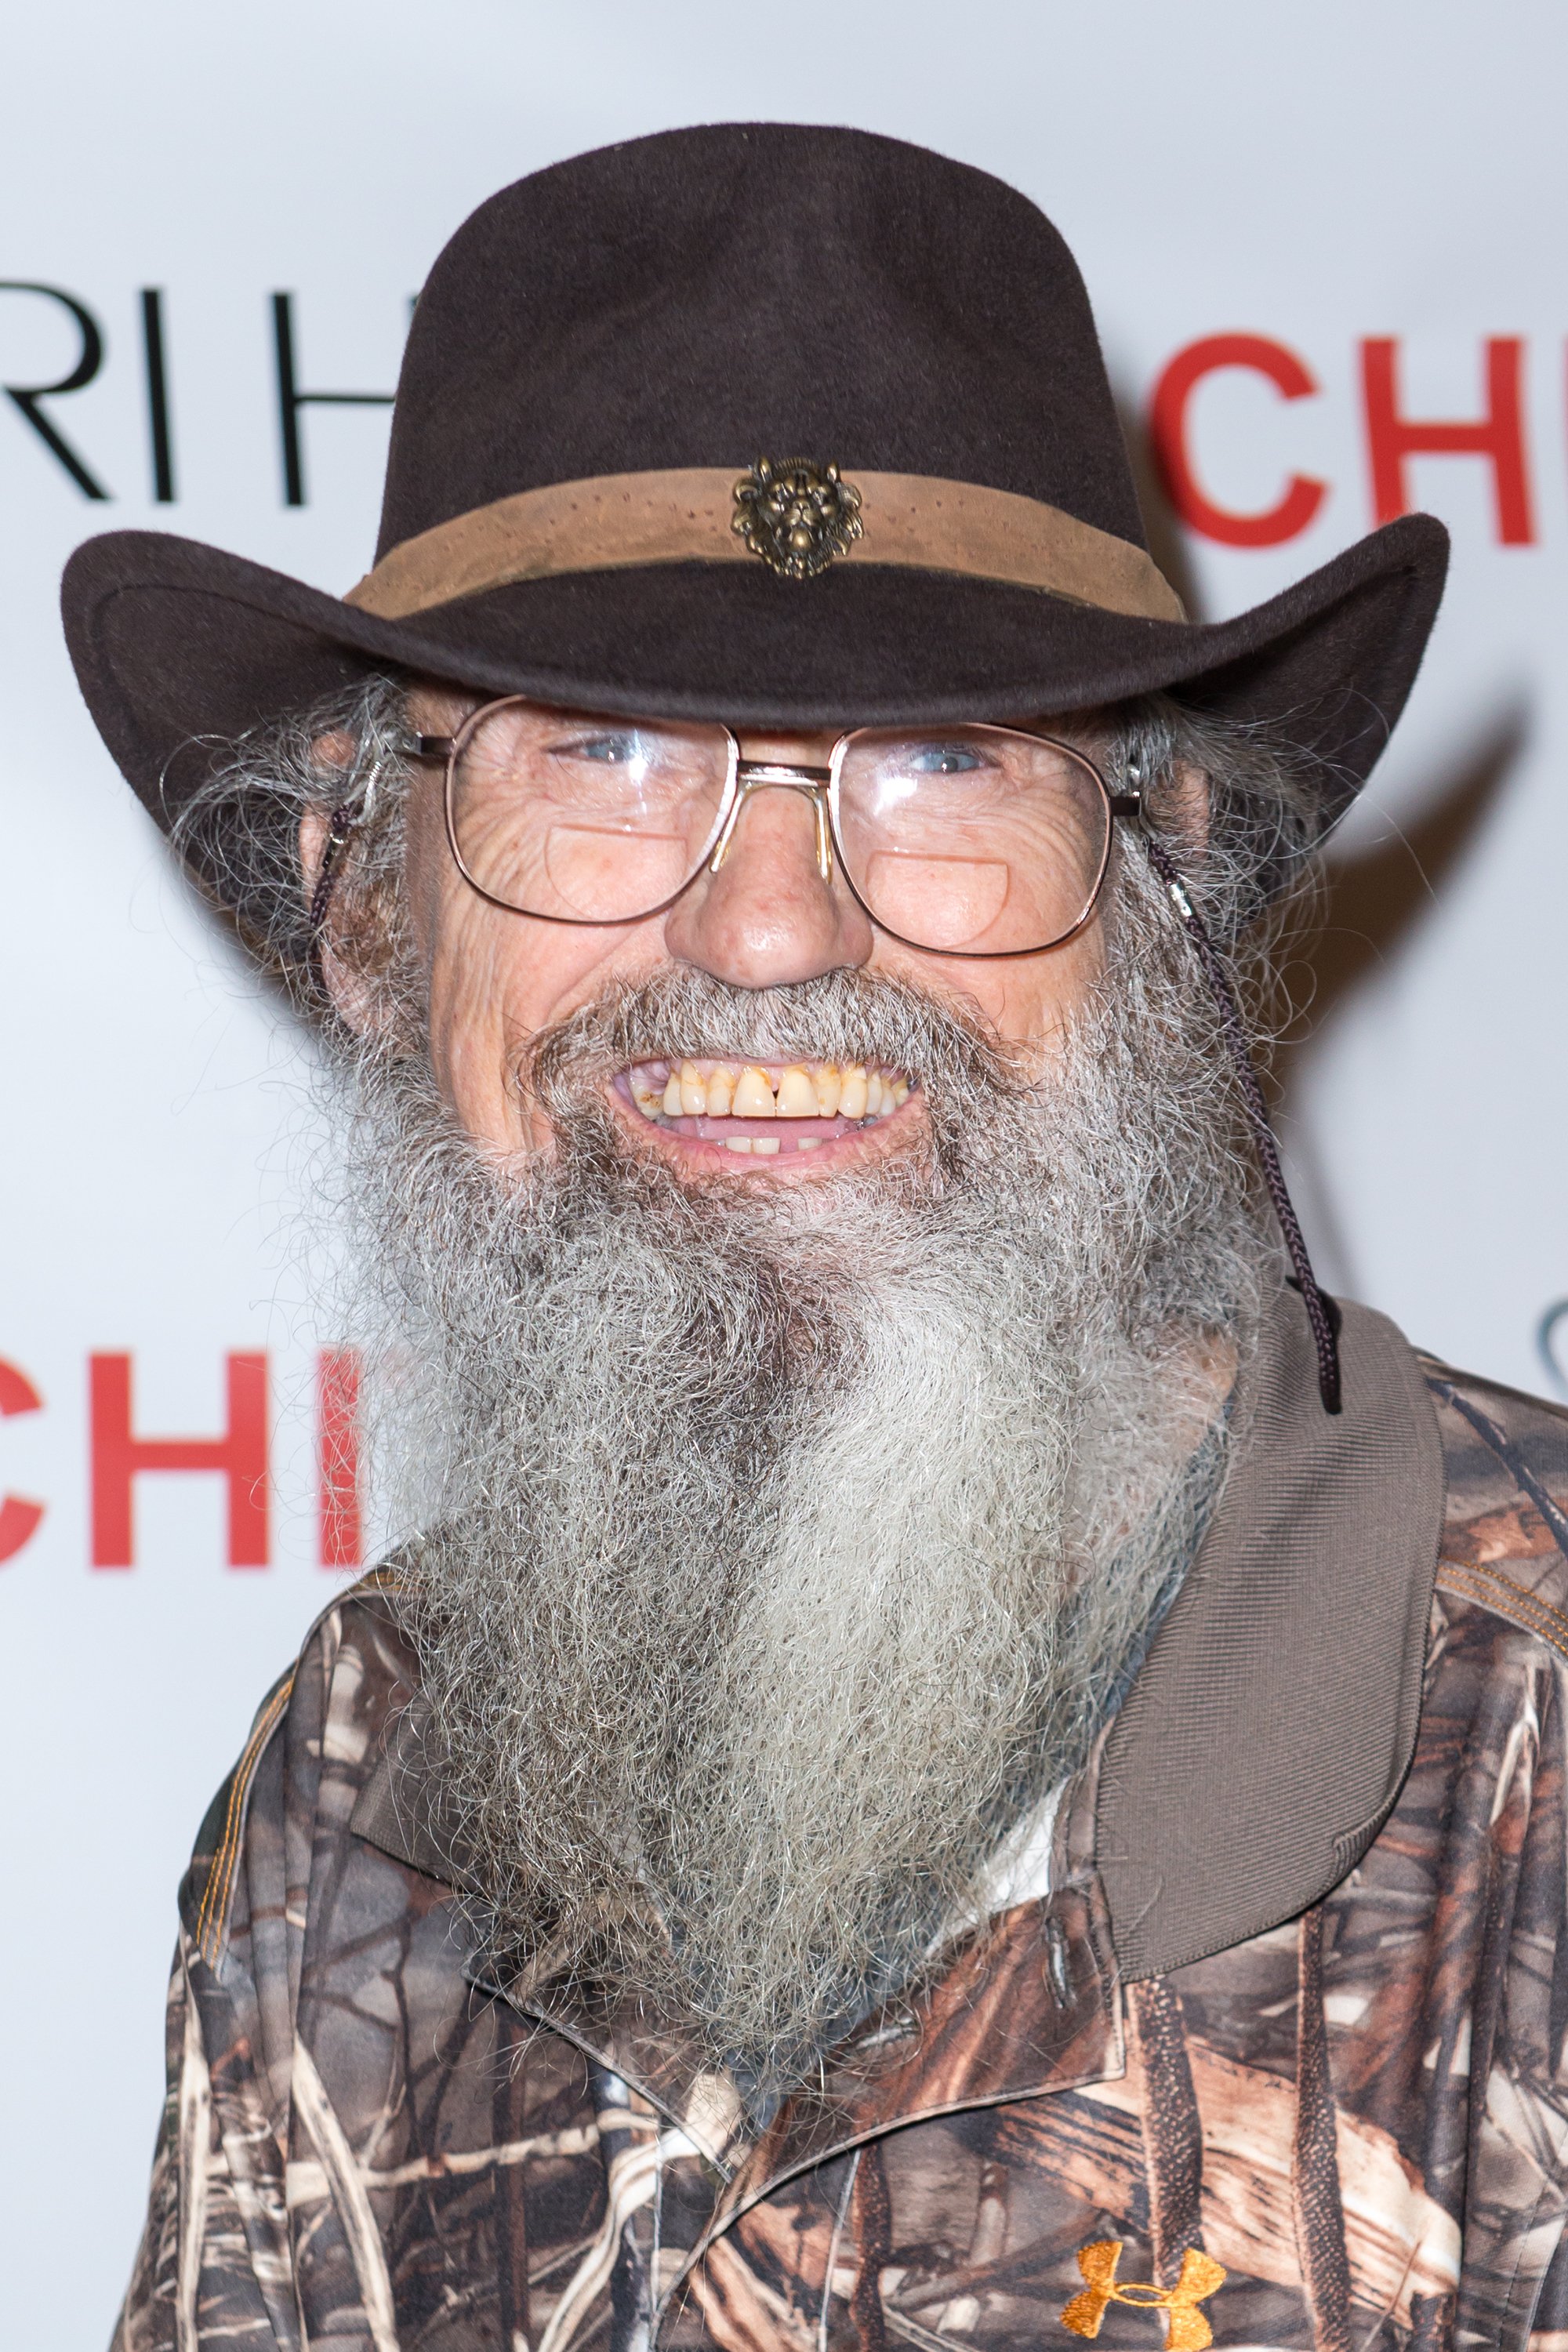 Silas Merritt "Si" Robertson at the Evening By Sherri Hill Spring 2014 show at Trump Tower in New York City | Photo: Michael Stewart/FilmMagic via Getty Images